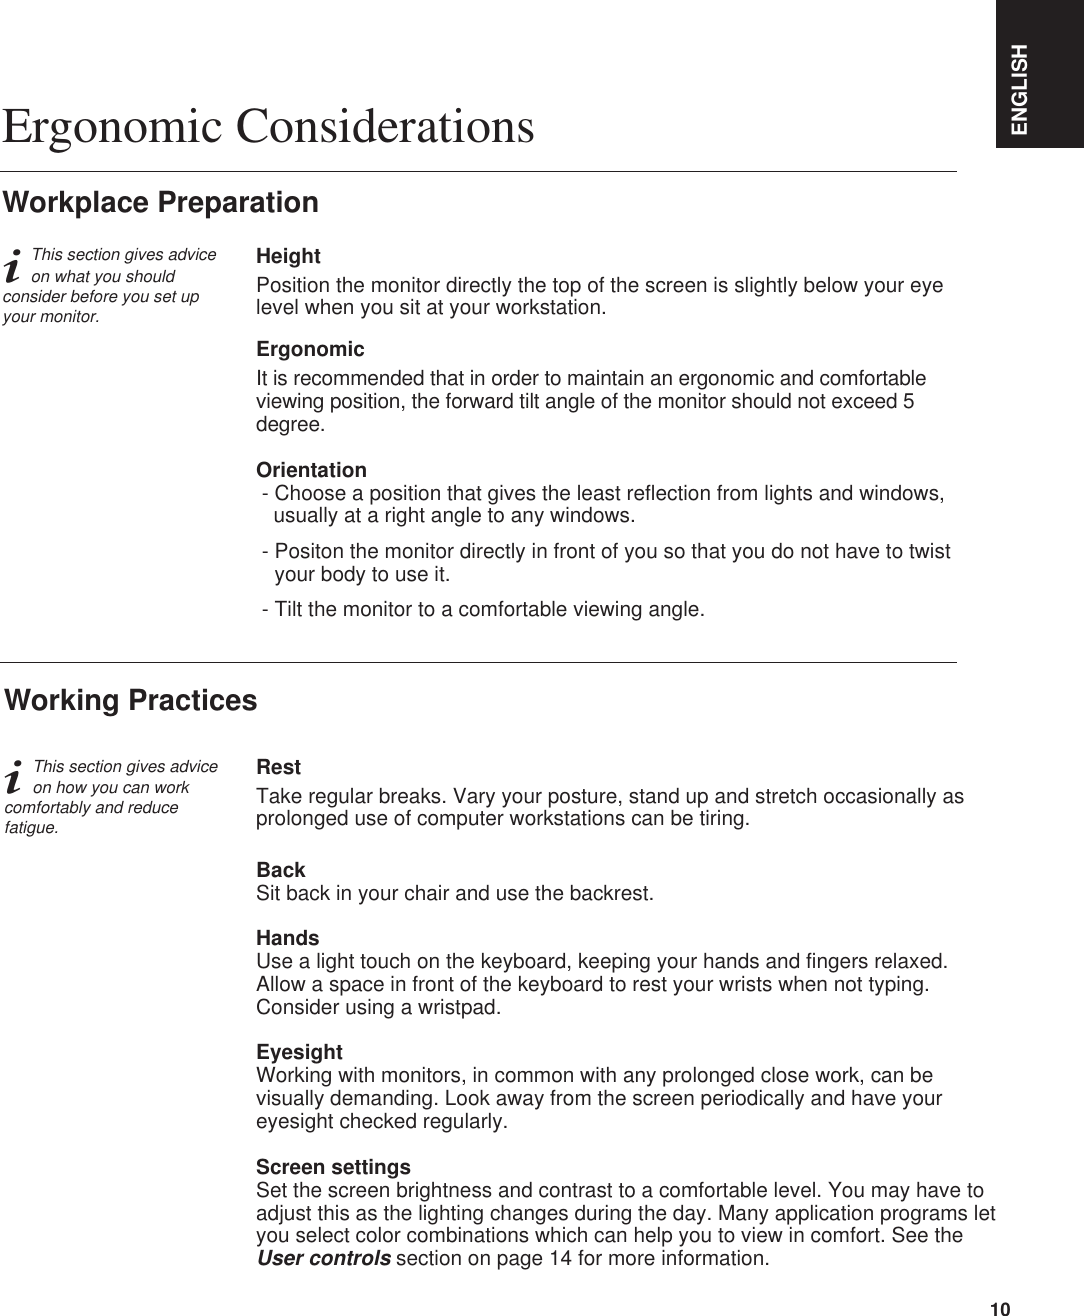 ENGLISH10iThis section gives adviceon how you can workcomfortably and reducefatigue.RestTake regular breaks. Vary your posture, stand up and stretch occasionally asprolonged use of computer workstations can be tiring.BackSit back in your chair and use the backrest.HandsUse a light touch on the keyboard, keeping your hands and fingers relaxed.Allow a space in front of the keyboard to rest your wrists when not typing.Consider using a wristpad.EyesightWorking with monitors, in common with any prolonged close work, can bevisually demanding. Look away from the screen periodically and have youreyesight checked regularly.Screen settingsSet the screen brightness and contrast to a comfortable level. You may have toadjust this as the lighting changes during the day. Many application programs letyou select color combinations which can help you to view in comfort. See theUser controls section on page 14 for more information.Working PracticesiThis section gives adviceon what you shouldconsider before you set upyour monitor.Workplace PreparationHeightPosition the monitor directly the top of the screen is slightly below your eyelevel when you sit at your workstation.ErgonomicIt is recommended that in order to maintain an ergonomic and comfortableviewing position, the forward tilt angle of the monitor should not exceed 5degree.Orientation- Choose a position that gives the least reflection from lights and windows, usually at a right angle to any windows.- Positon the monitor directly in front of you so that you do not have to twistyour body to use it.- Tilt the monitor to a comfortable viewing angle.Ergonomic Considerations